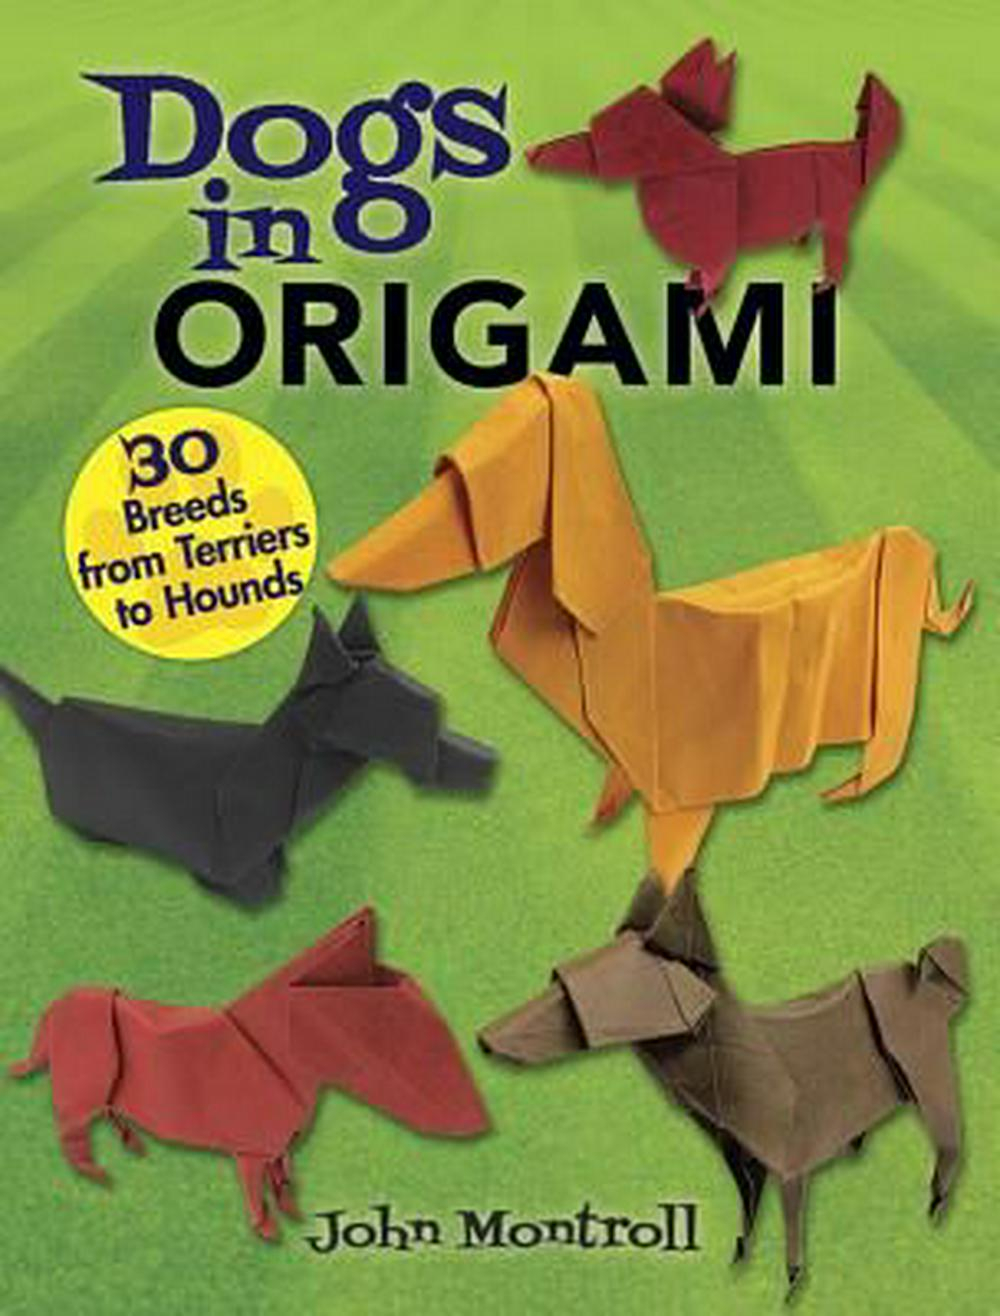 Origami Dog Instructions Advanced Dogs In Origami